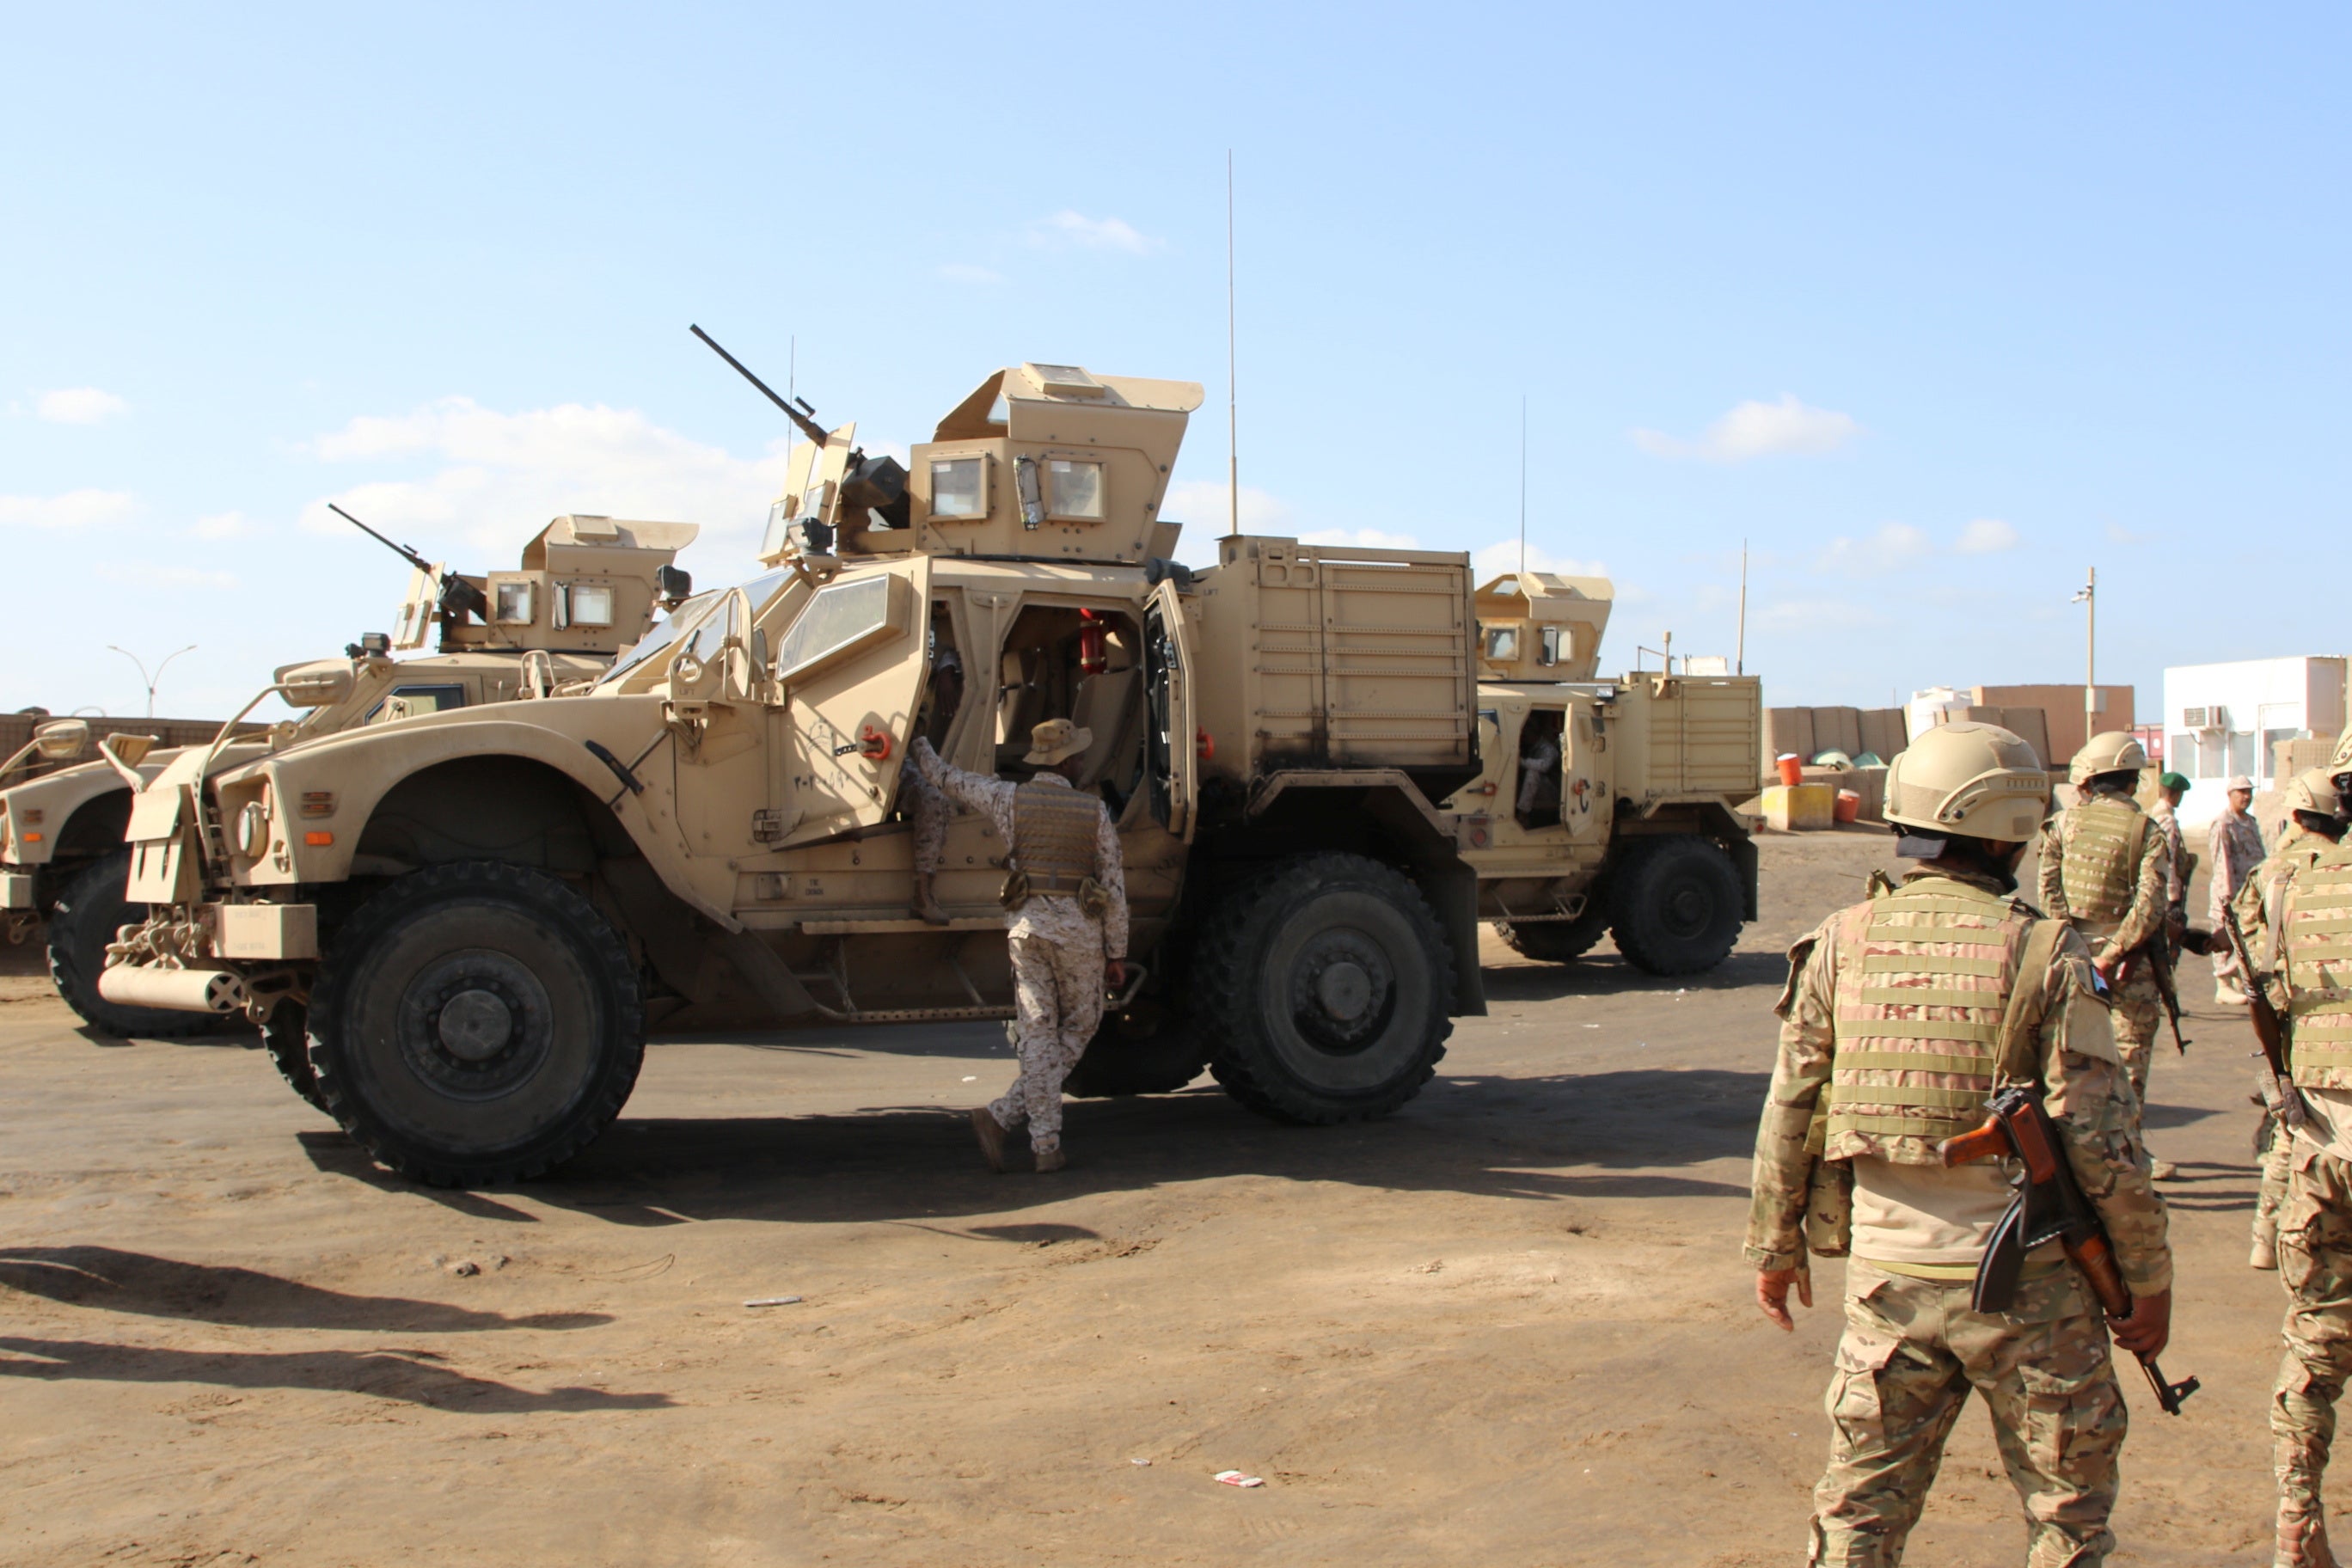 Saudi military personnel at the gate of the Saudi-led coalition’s base in Aden, Yemen